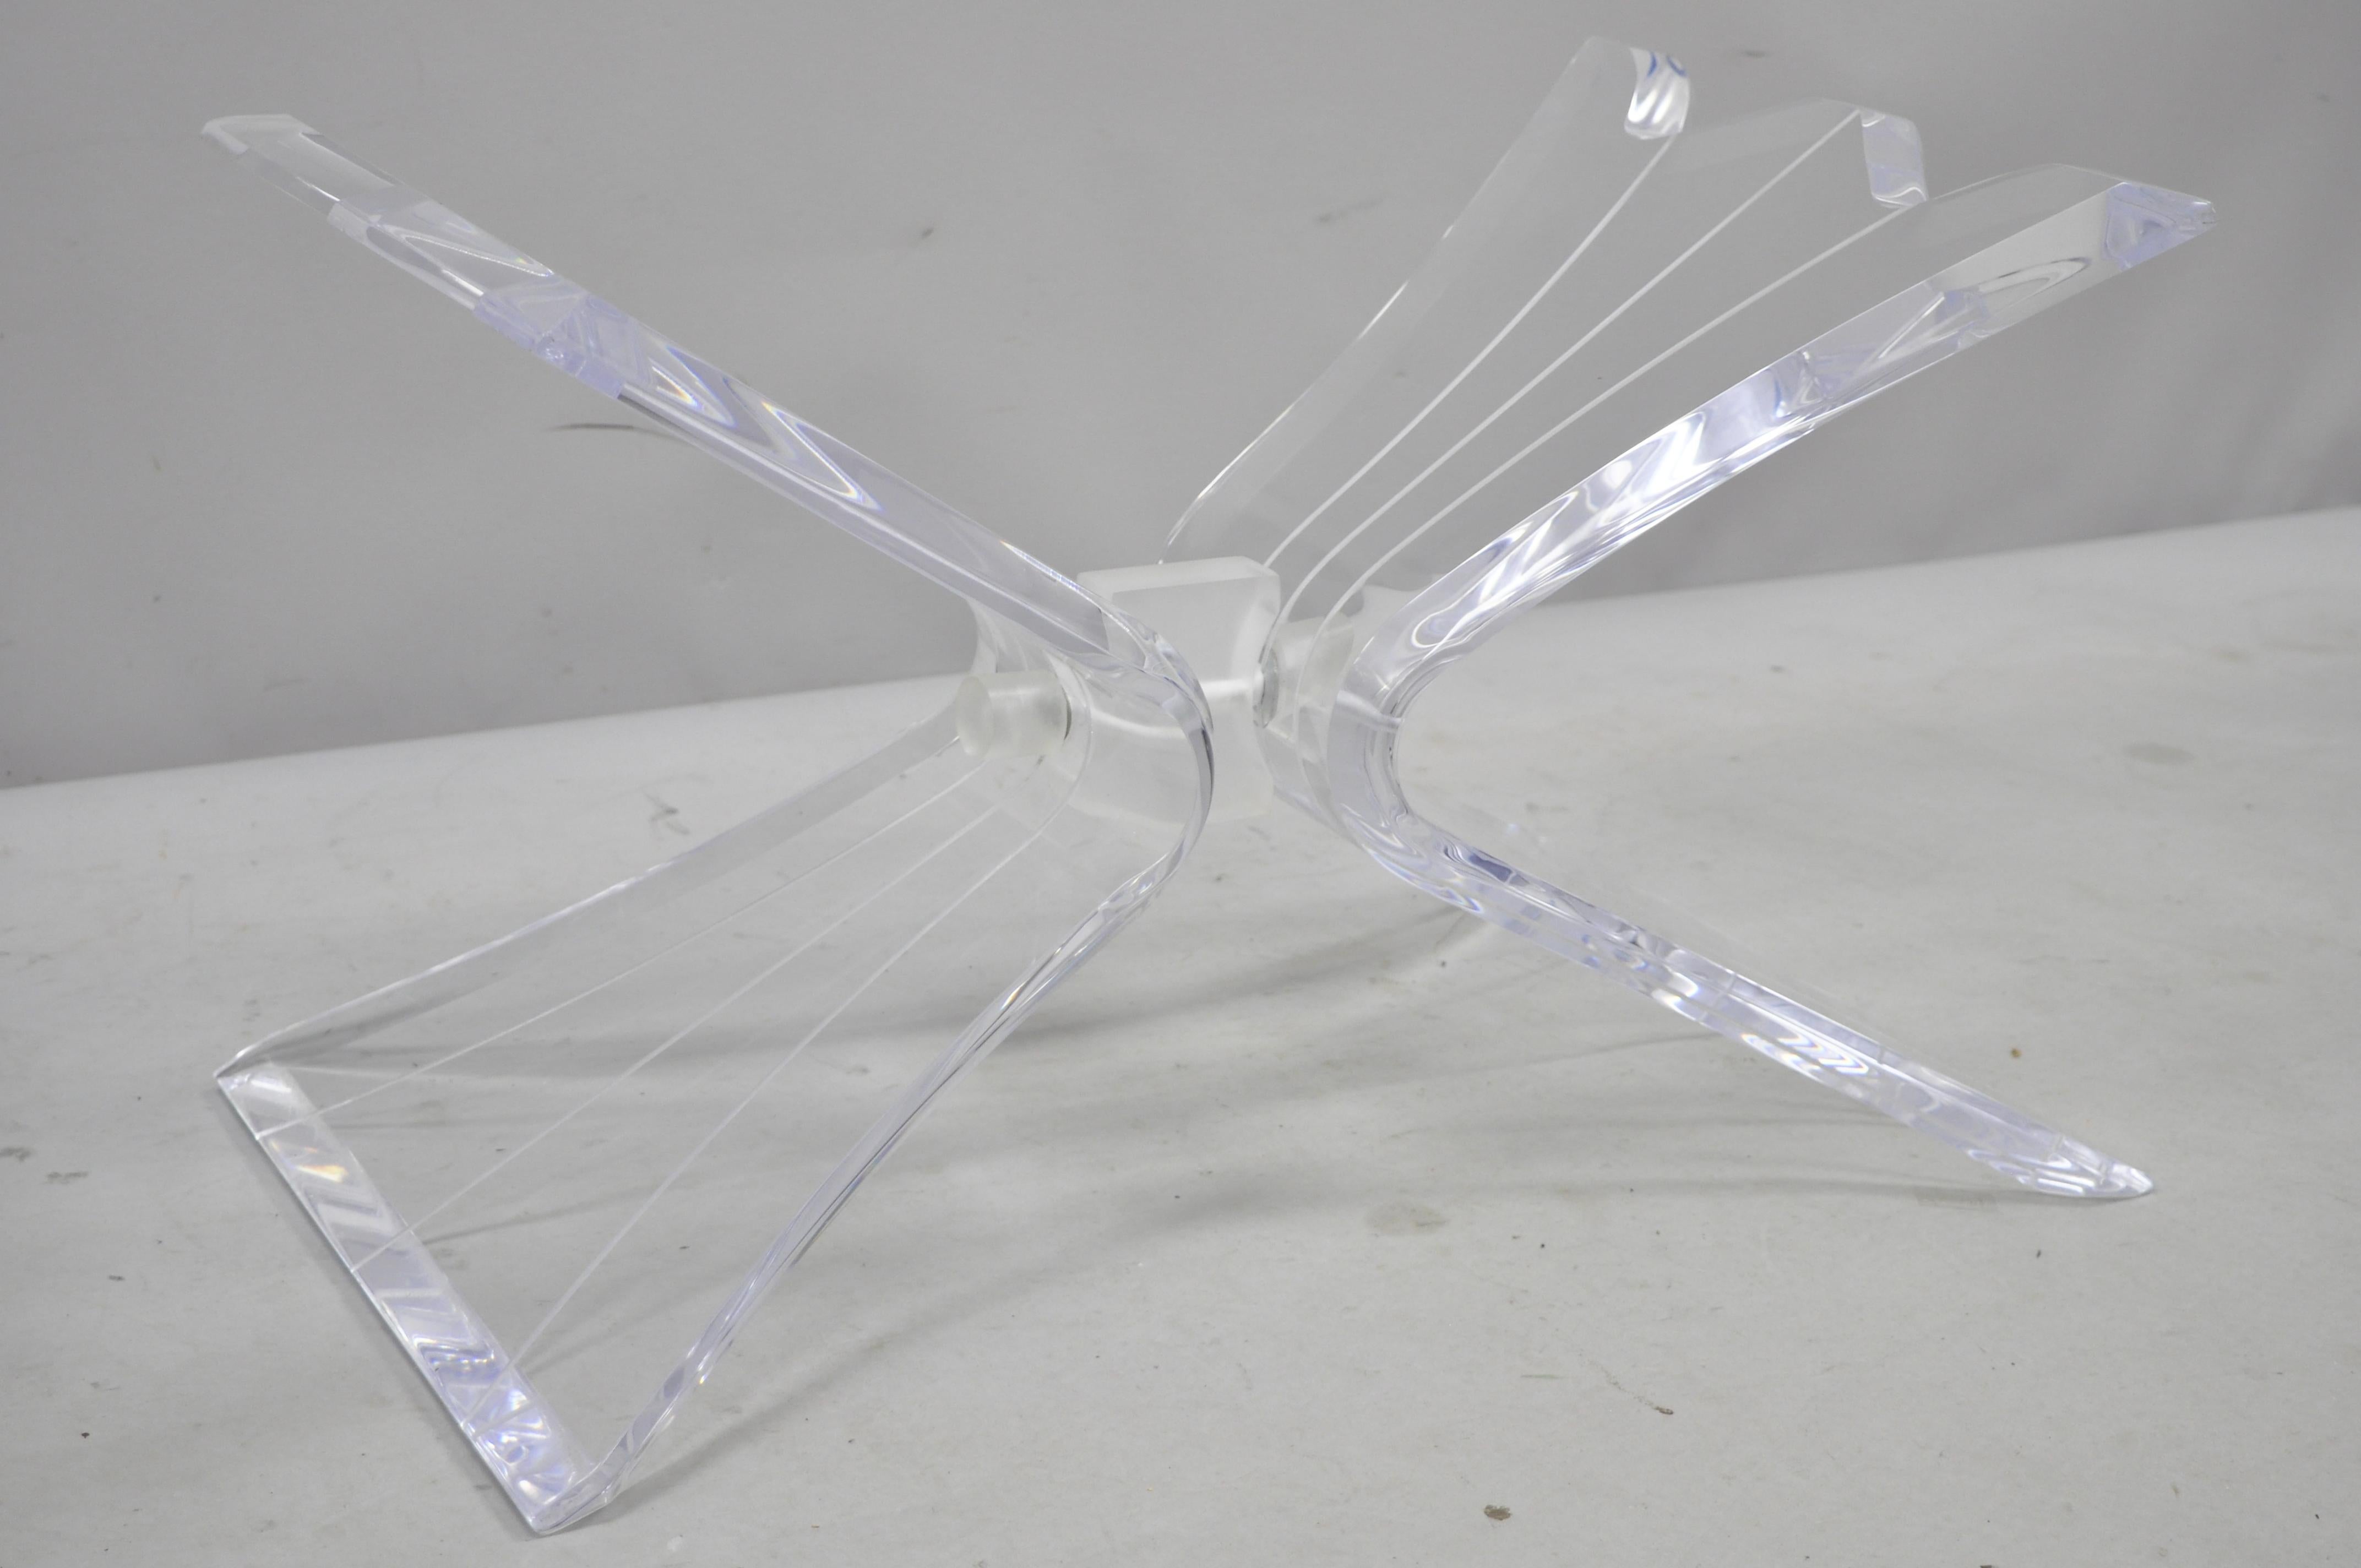 Vintage Mid-Century Modern Lucite butterfly lion in frost style coffee table. Item includes sculptural Lucite butterfly base, very nice vintage item, sleek sculptural form,
circa mid-20th century. Measurements: 16